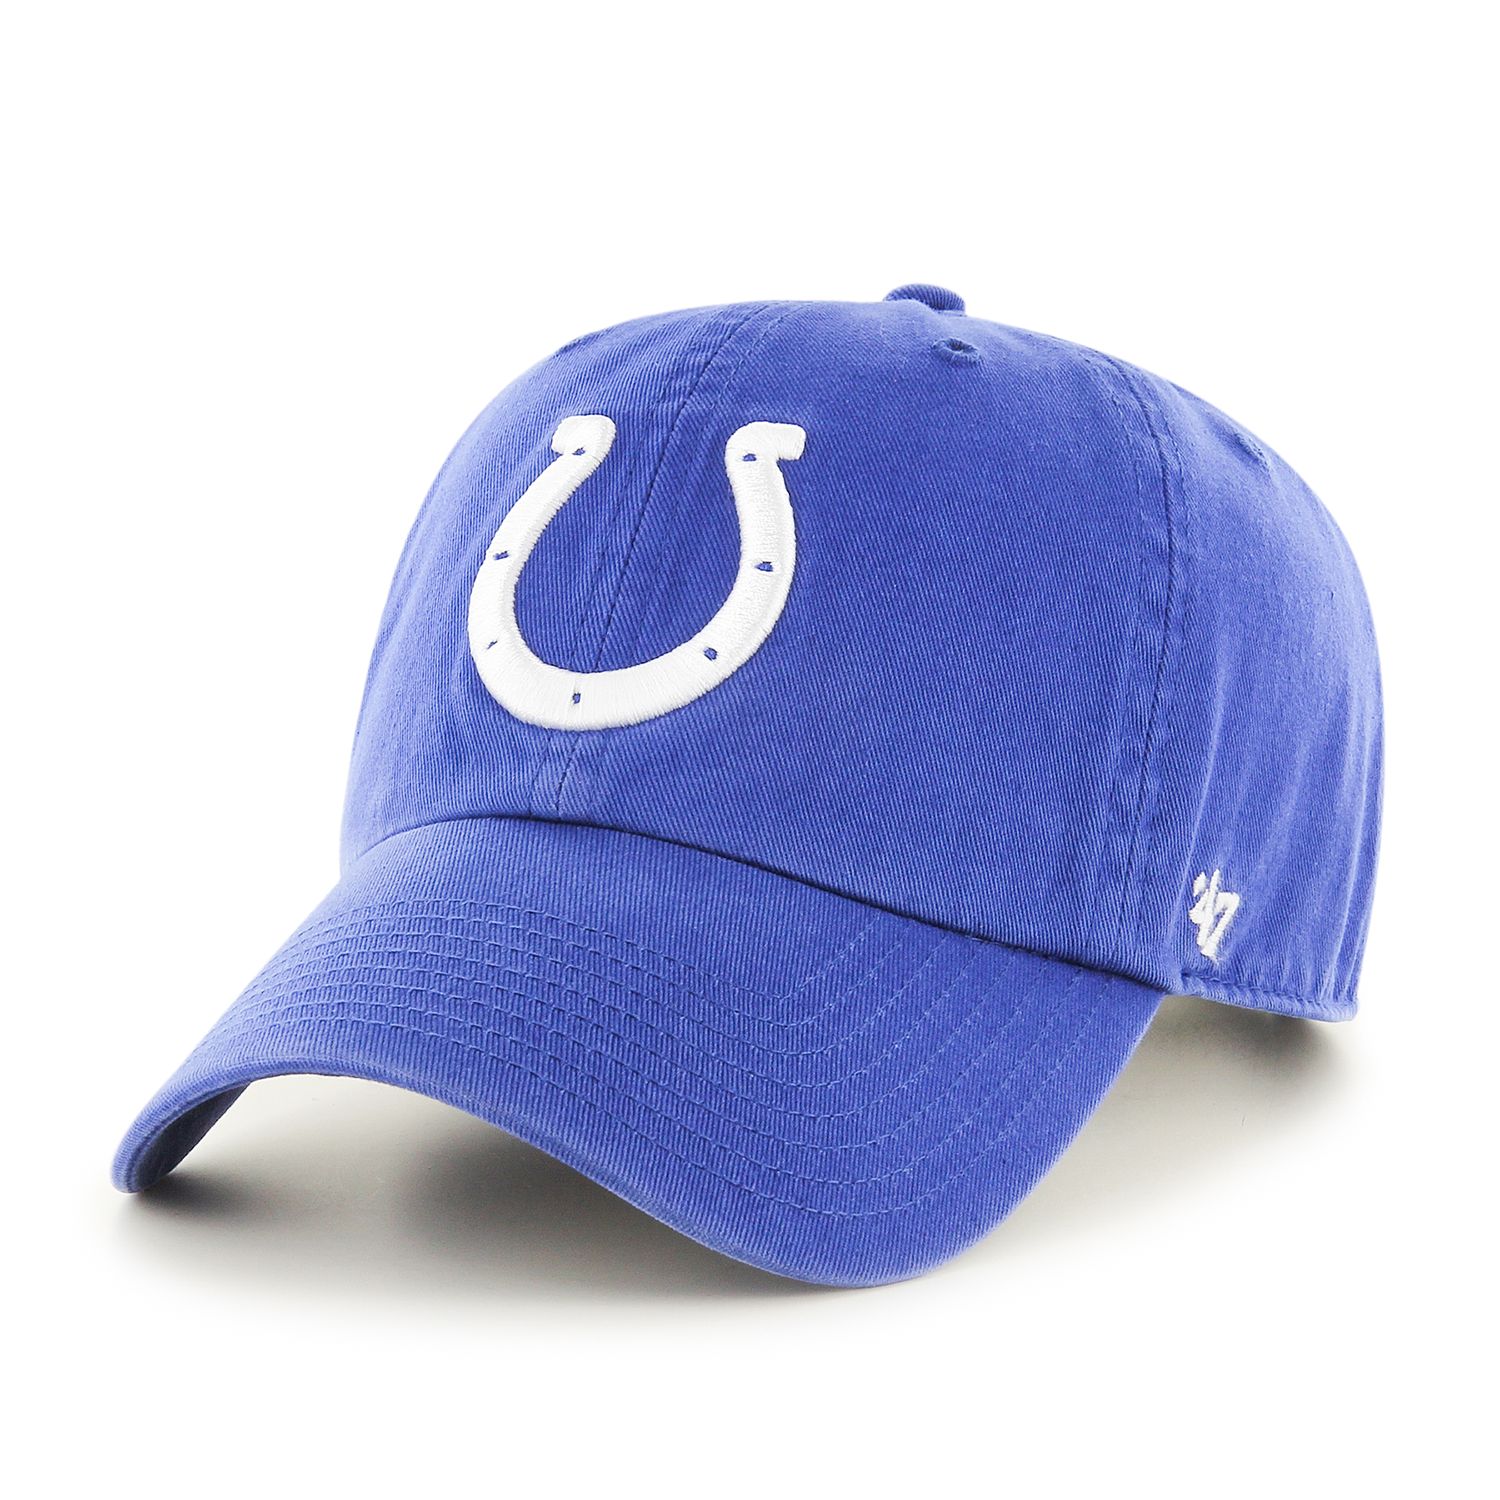 Indianapolis Colts Clean Up Adjustable Cap